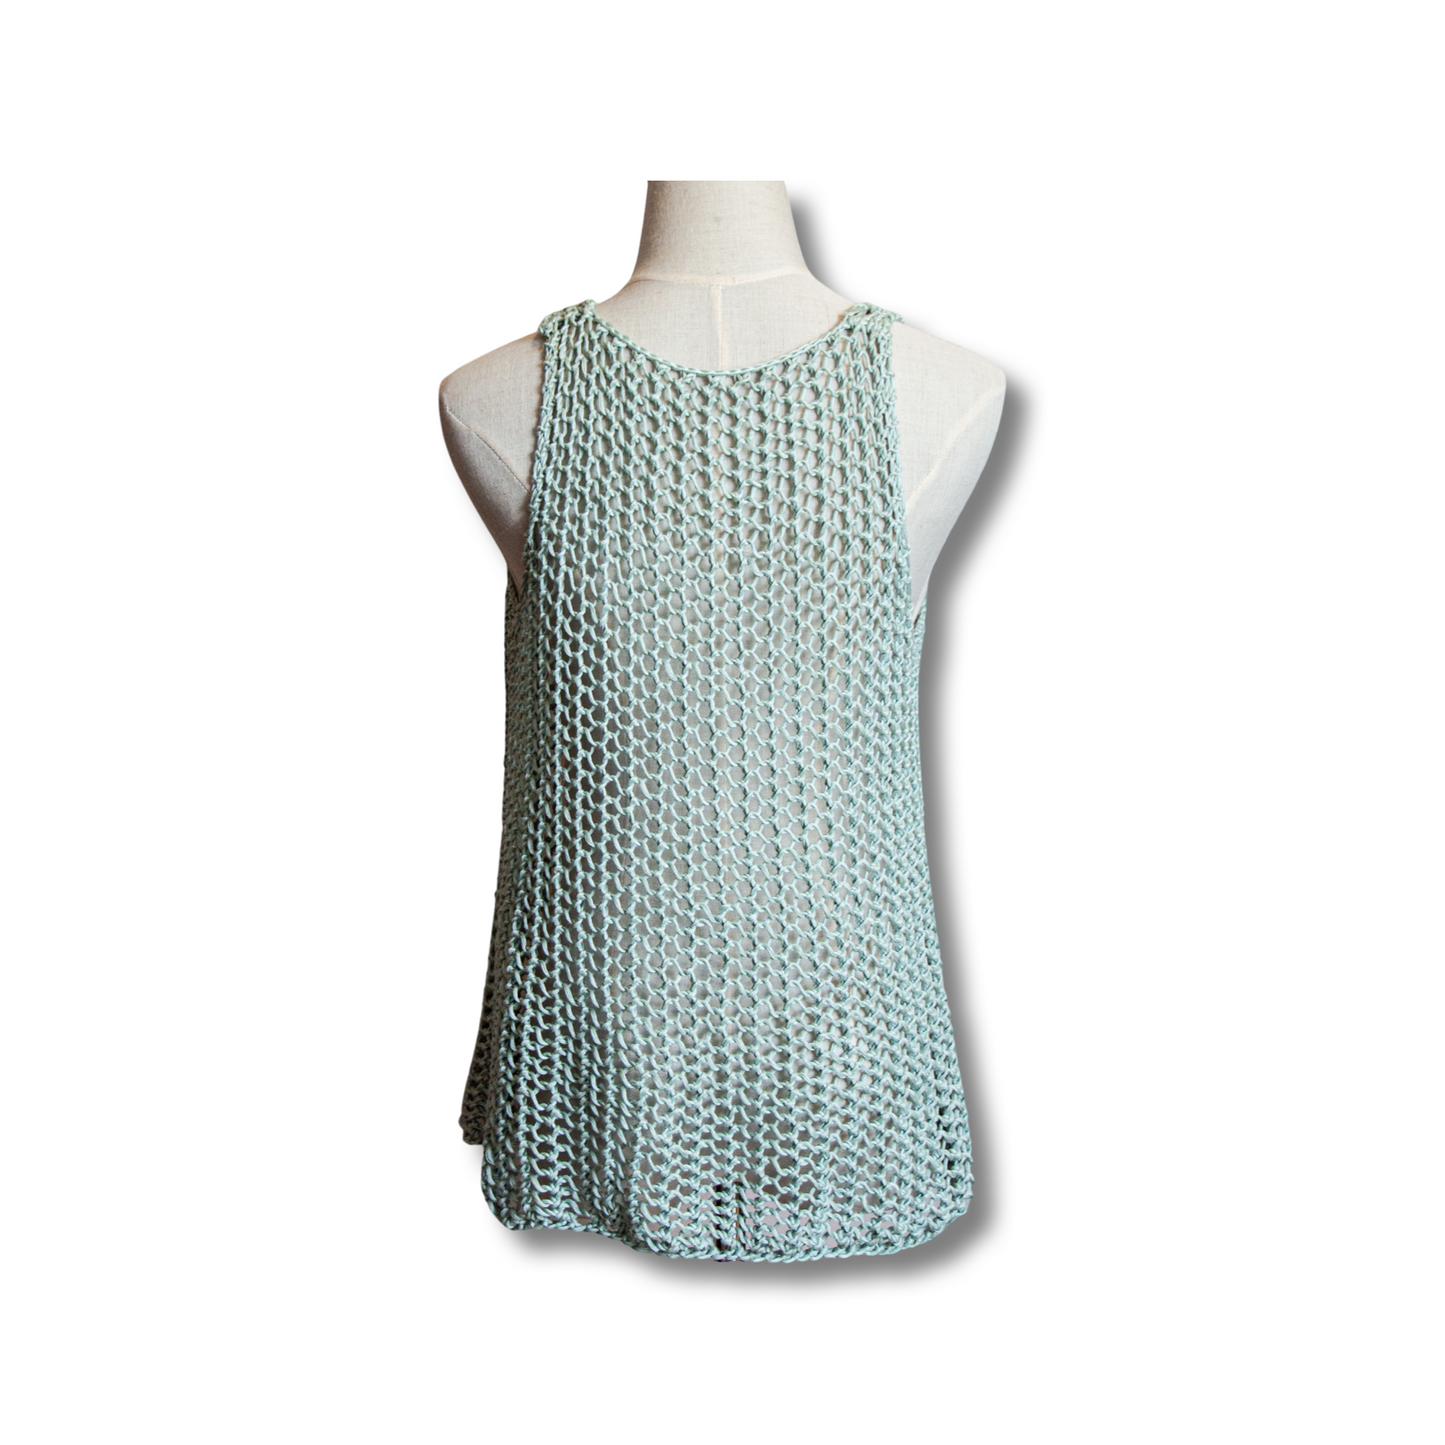 Knitted Beach Cover Up (Mint Green)